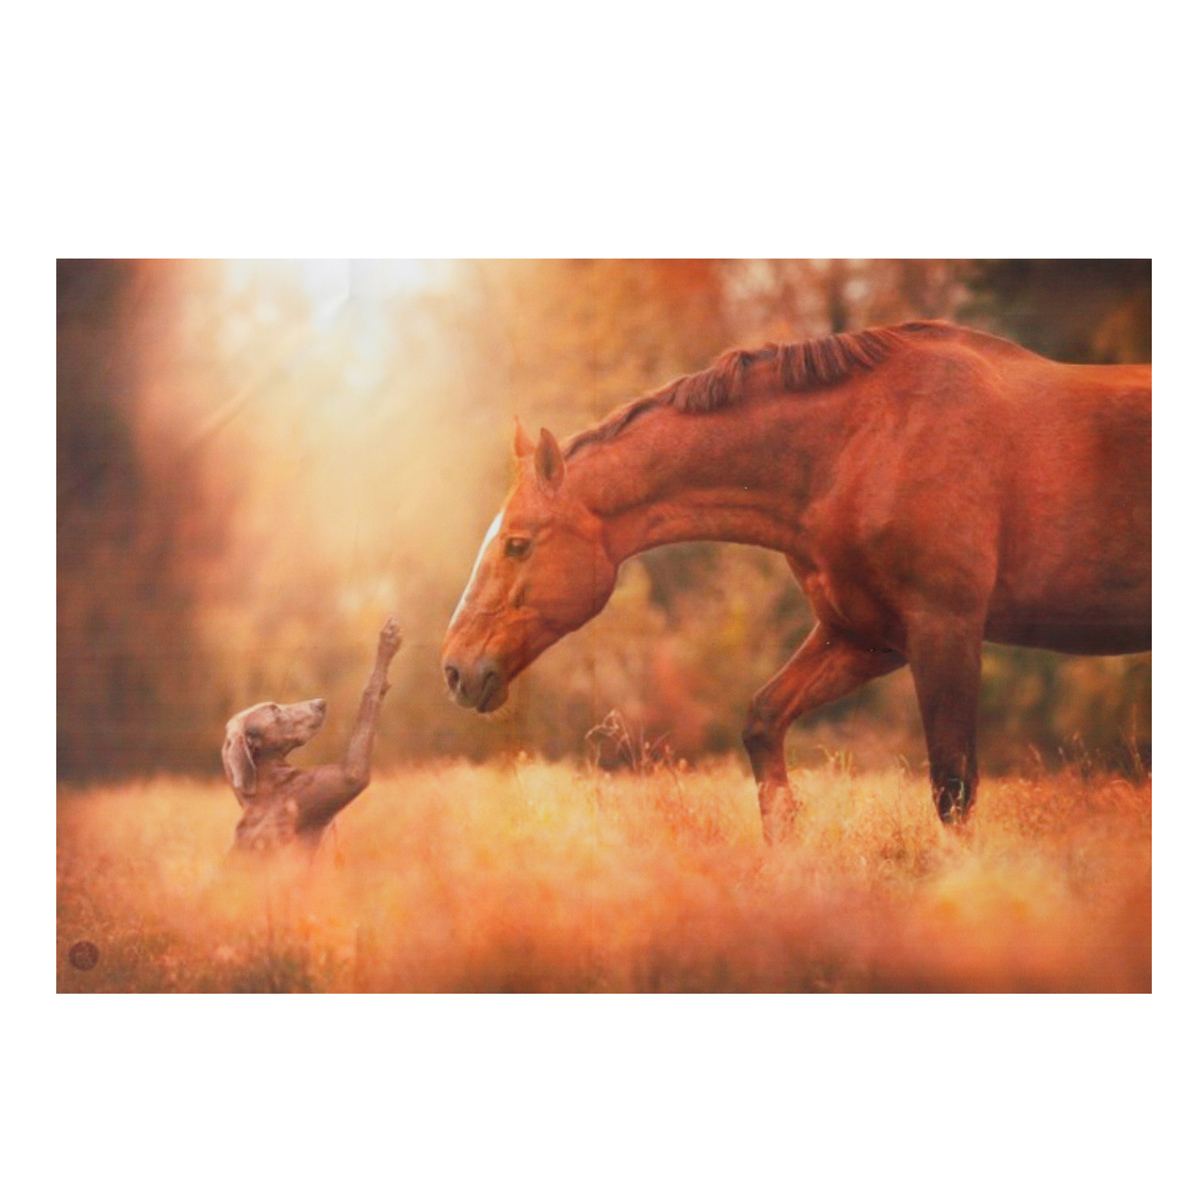 Friendship-of-Horse-and-Dog-Silk-Poster-Fabric-Nature-Animal-Print-Wall-Home-Decoration-1079143